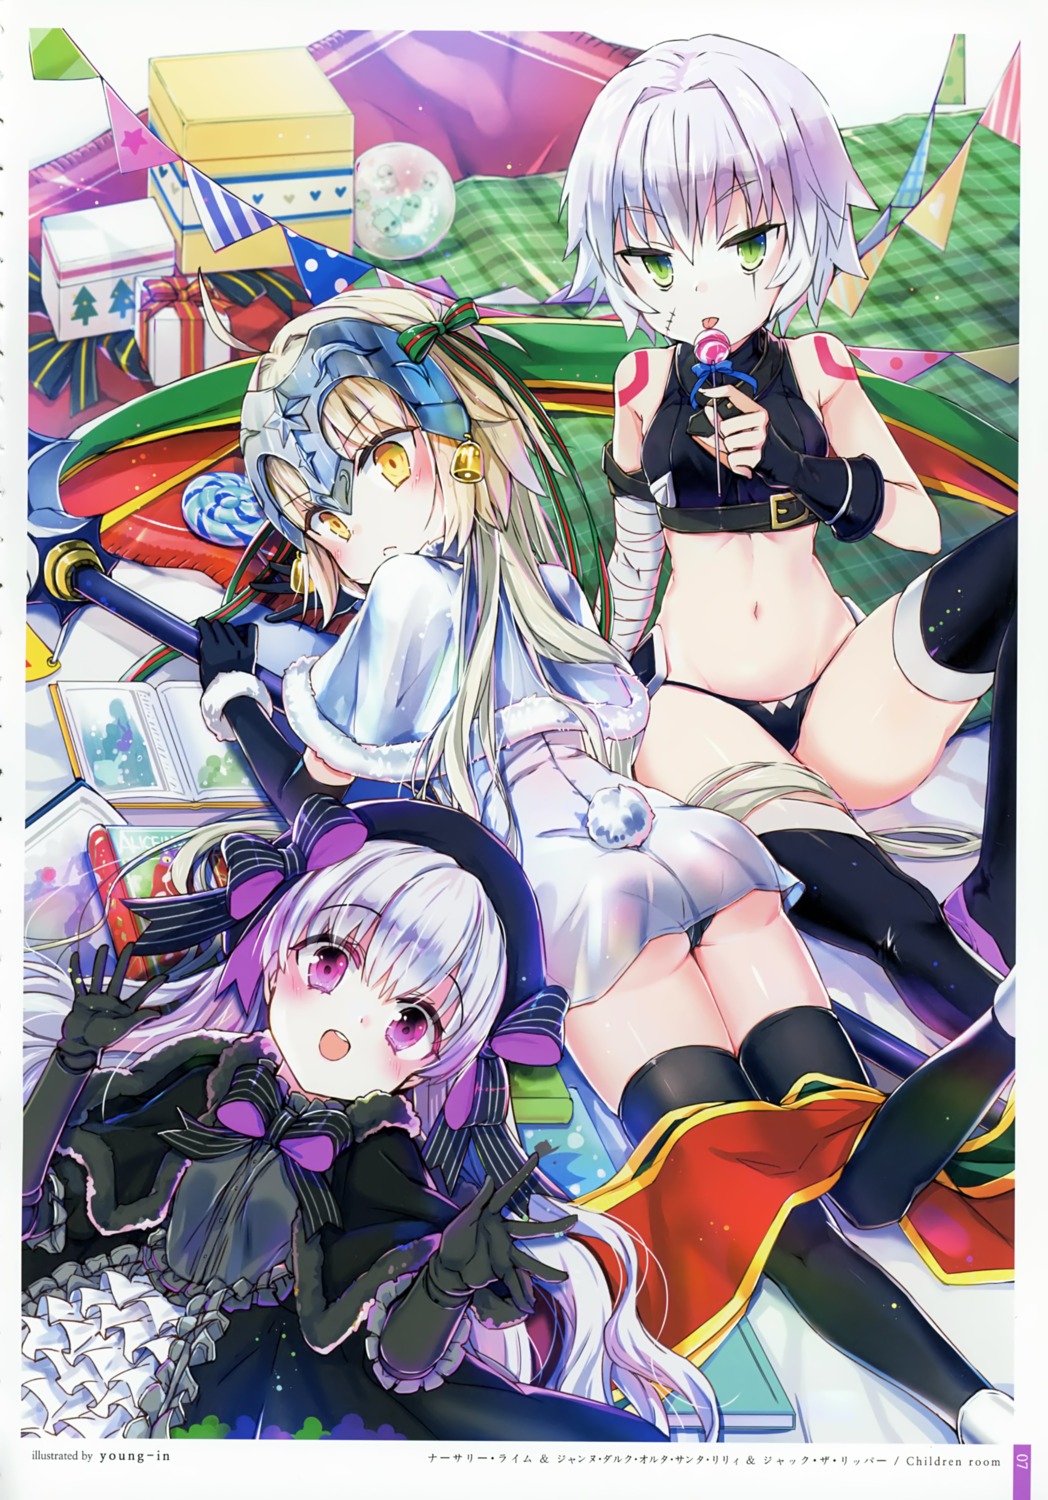 Young In Fate Extra Fate Grand Order Fate Stay Night Jack The Ripper Jeanne D Arc Alter Santa Lily Nursery Rhyme Fate Extra Ass Bandages Pantsu Tail Tattoo Thighhighs Weapon Yande Re